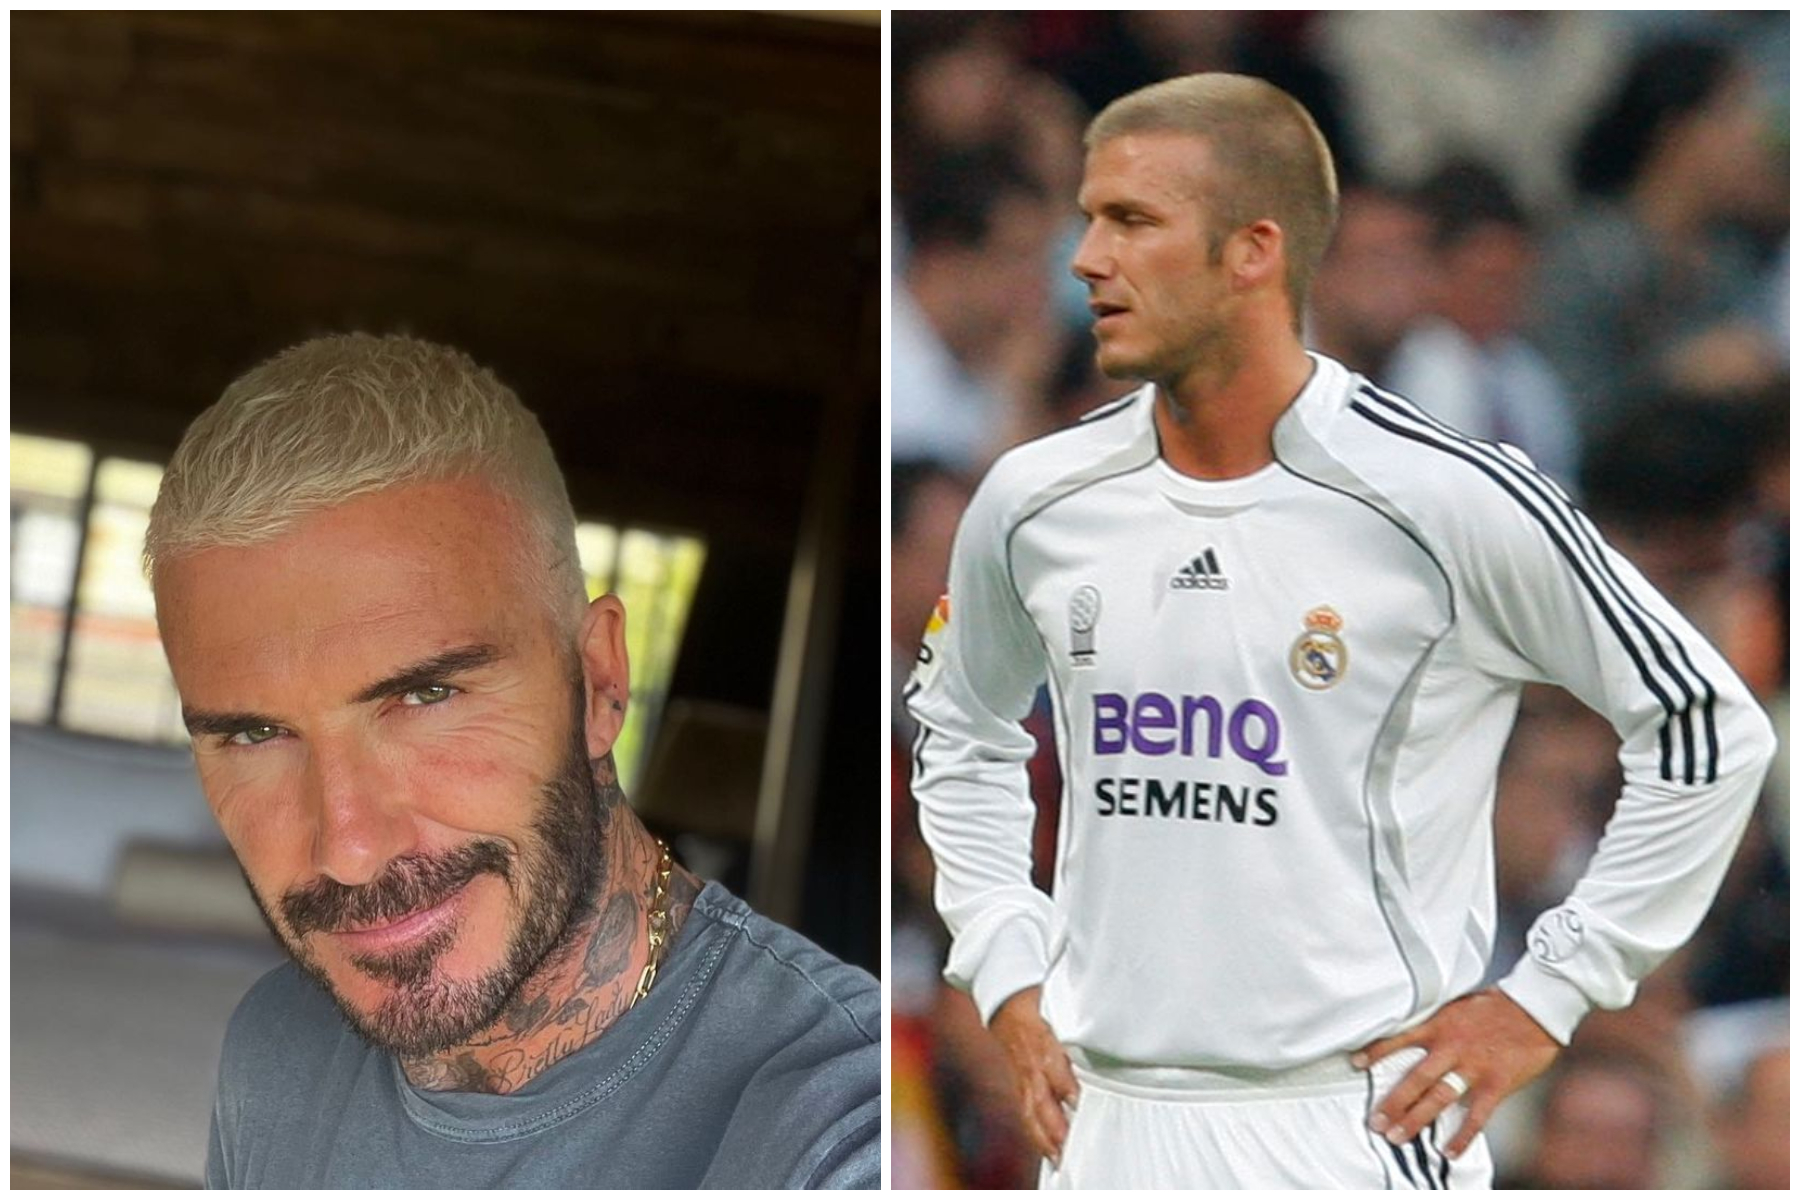 David Beckham Proves Peroxide Addiction Is Real With Shocking New Haircut